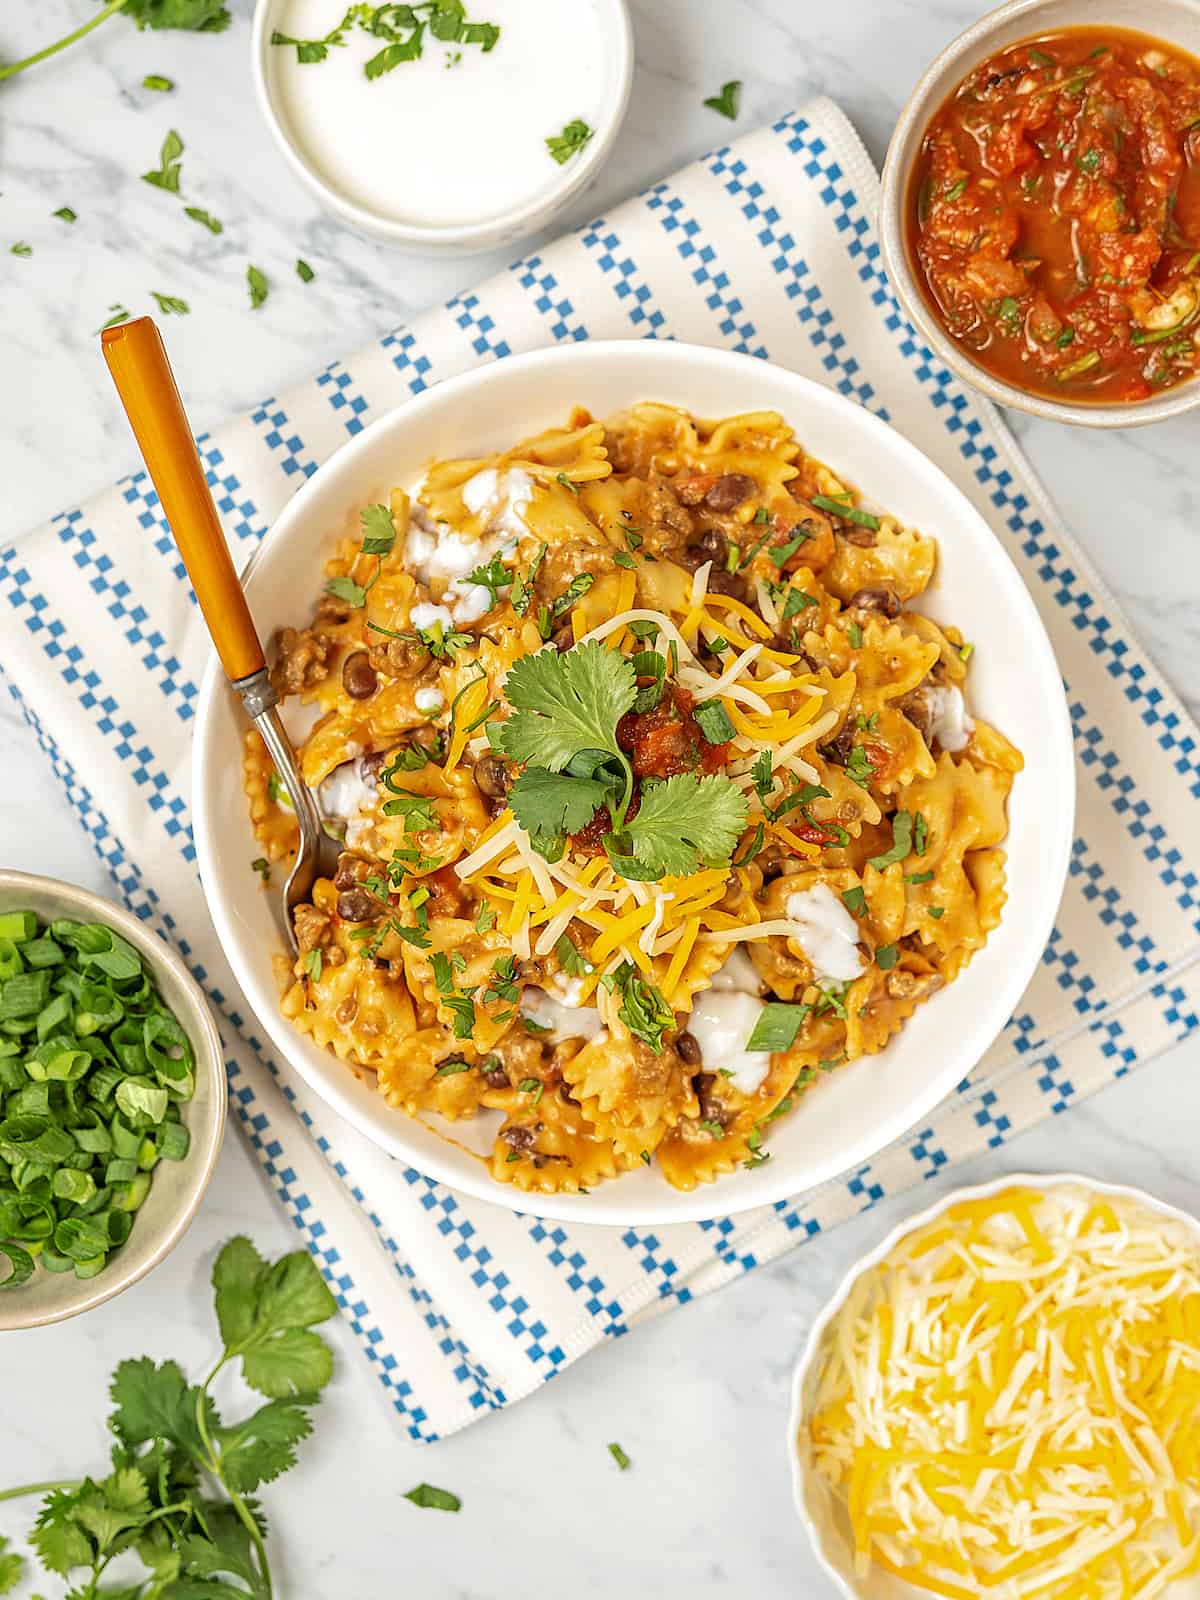 Overhead view of Instant Pot taco pasta with bowls of garnishes